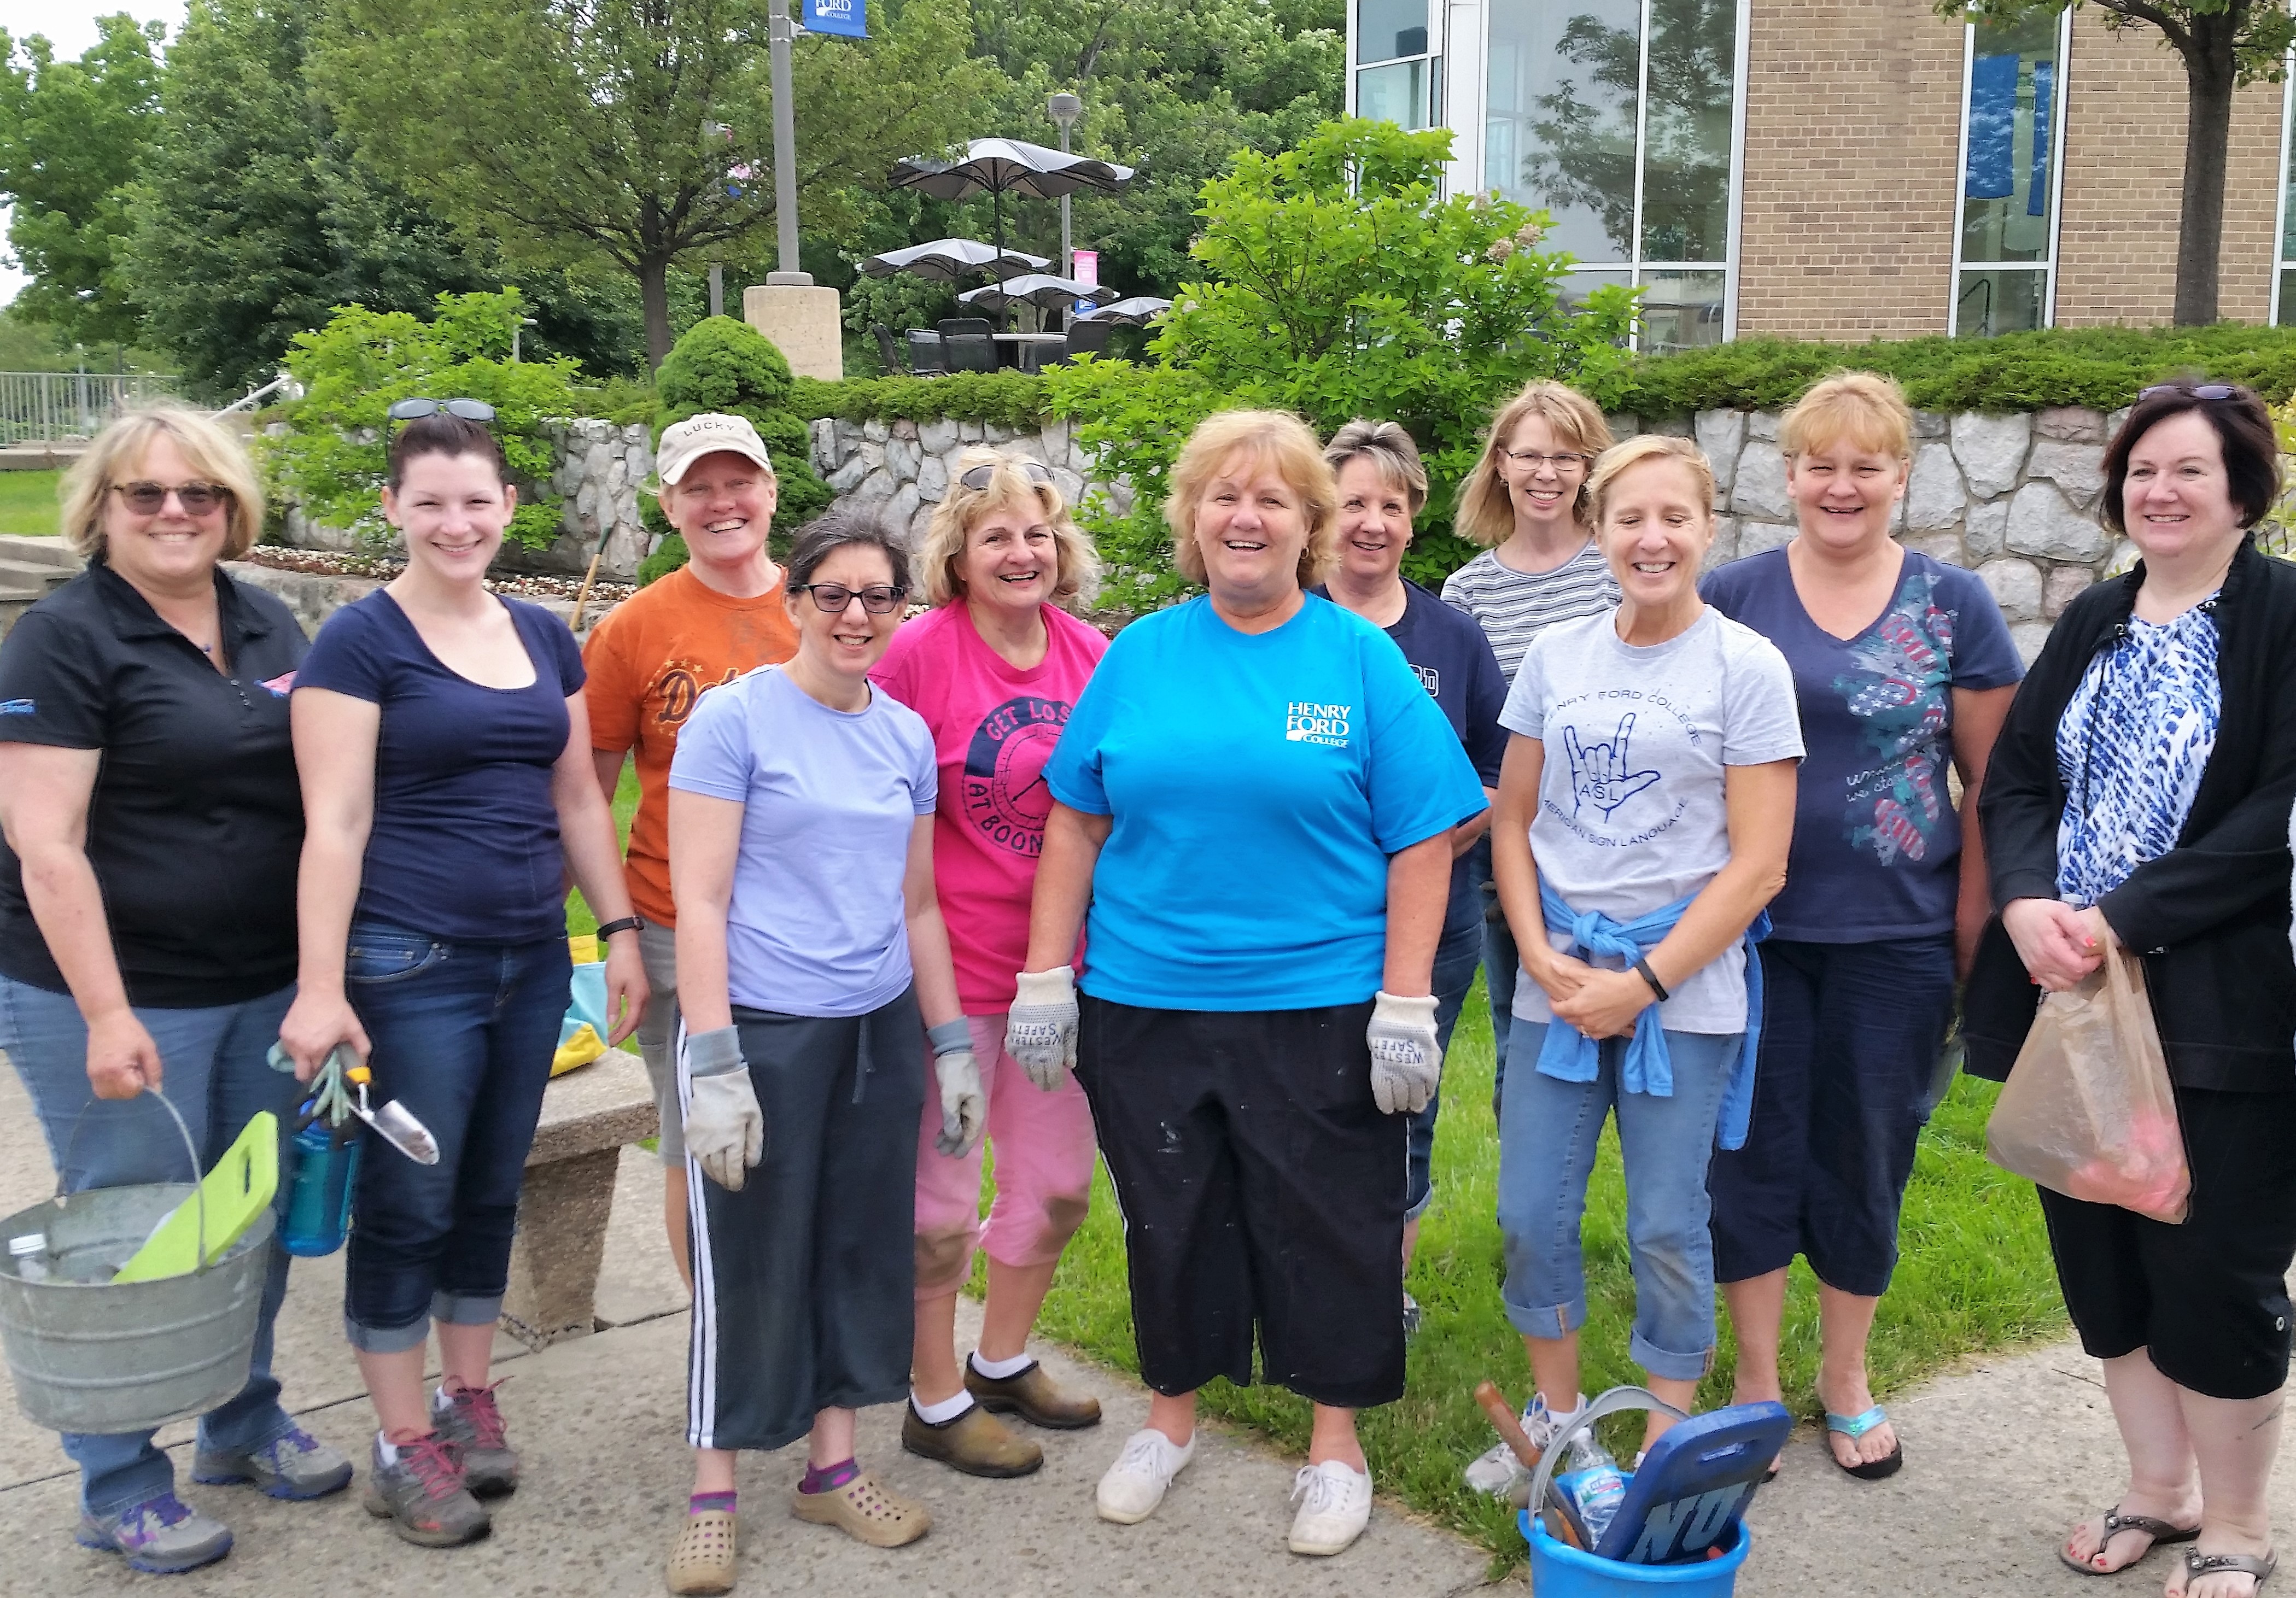 Eleven HFC employees ready for gardening. Notice how they're all women. Come on, guys, join in the fun!